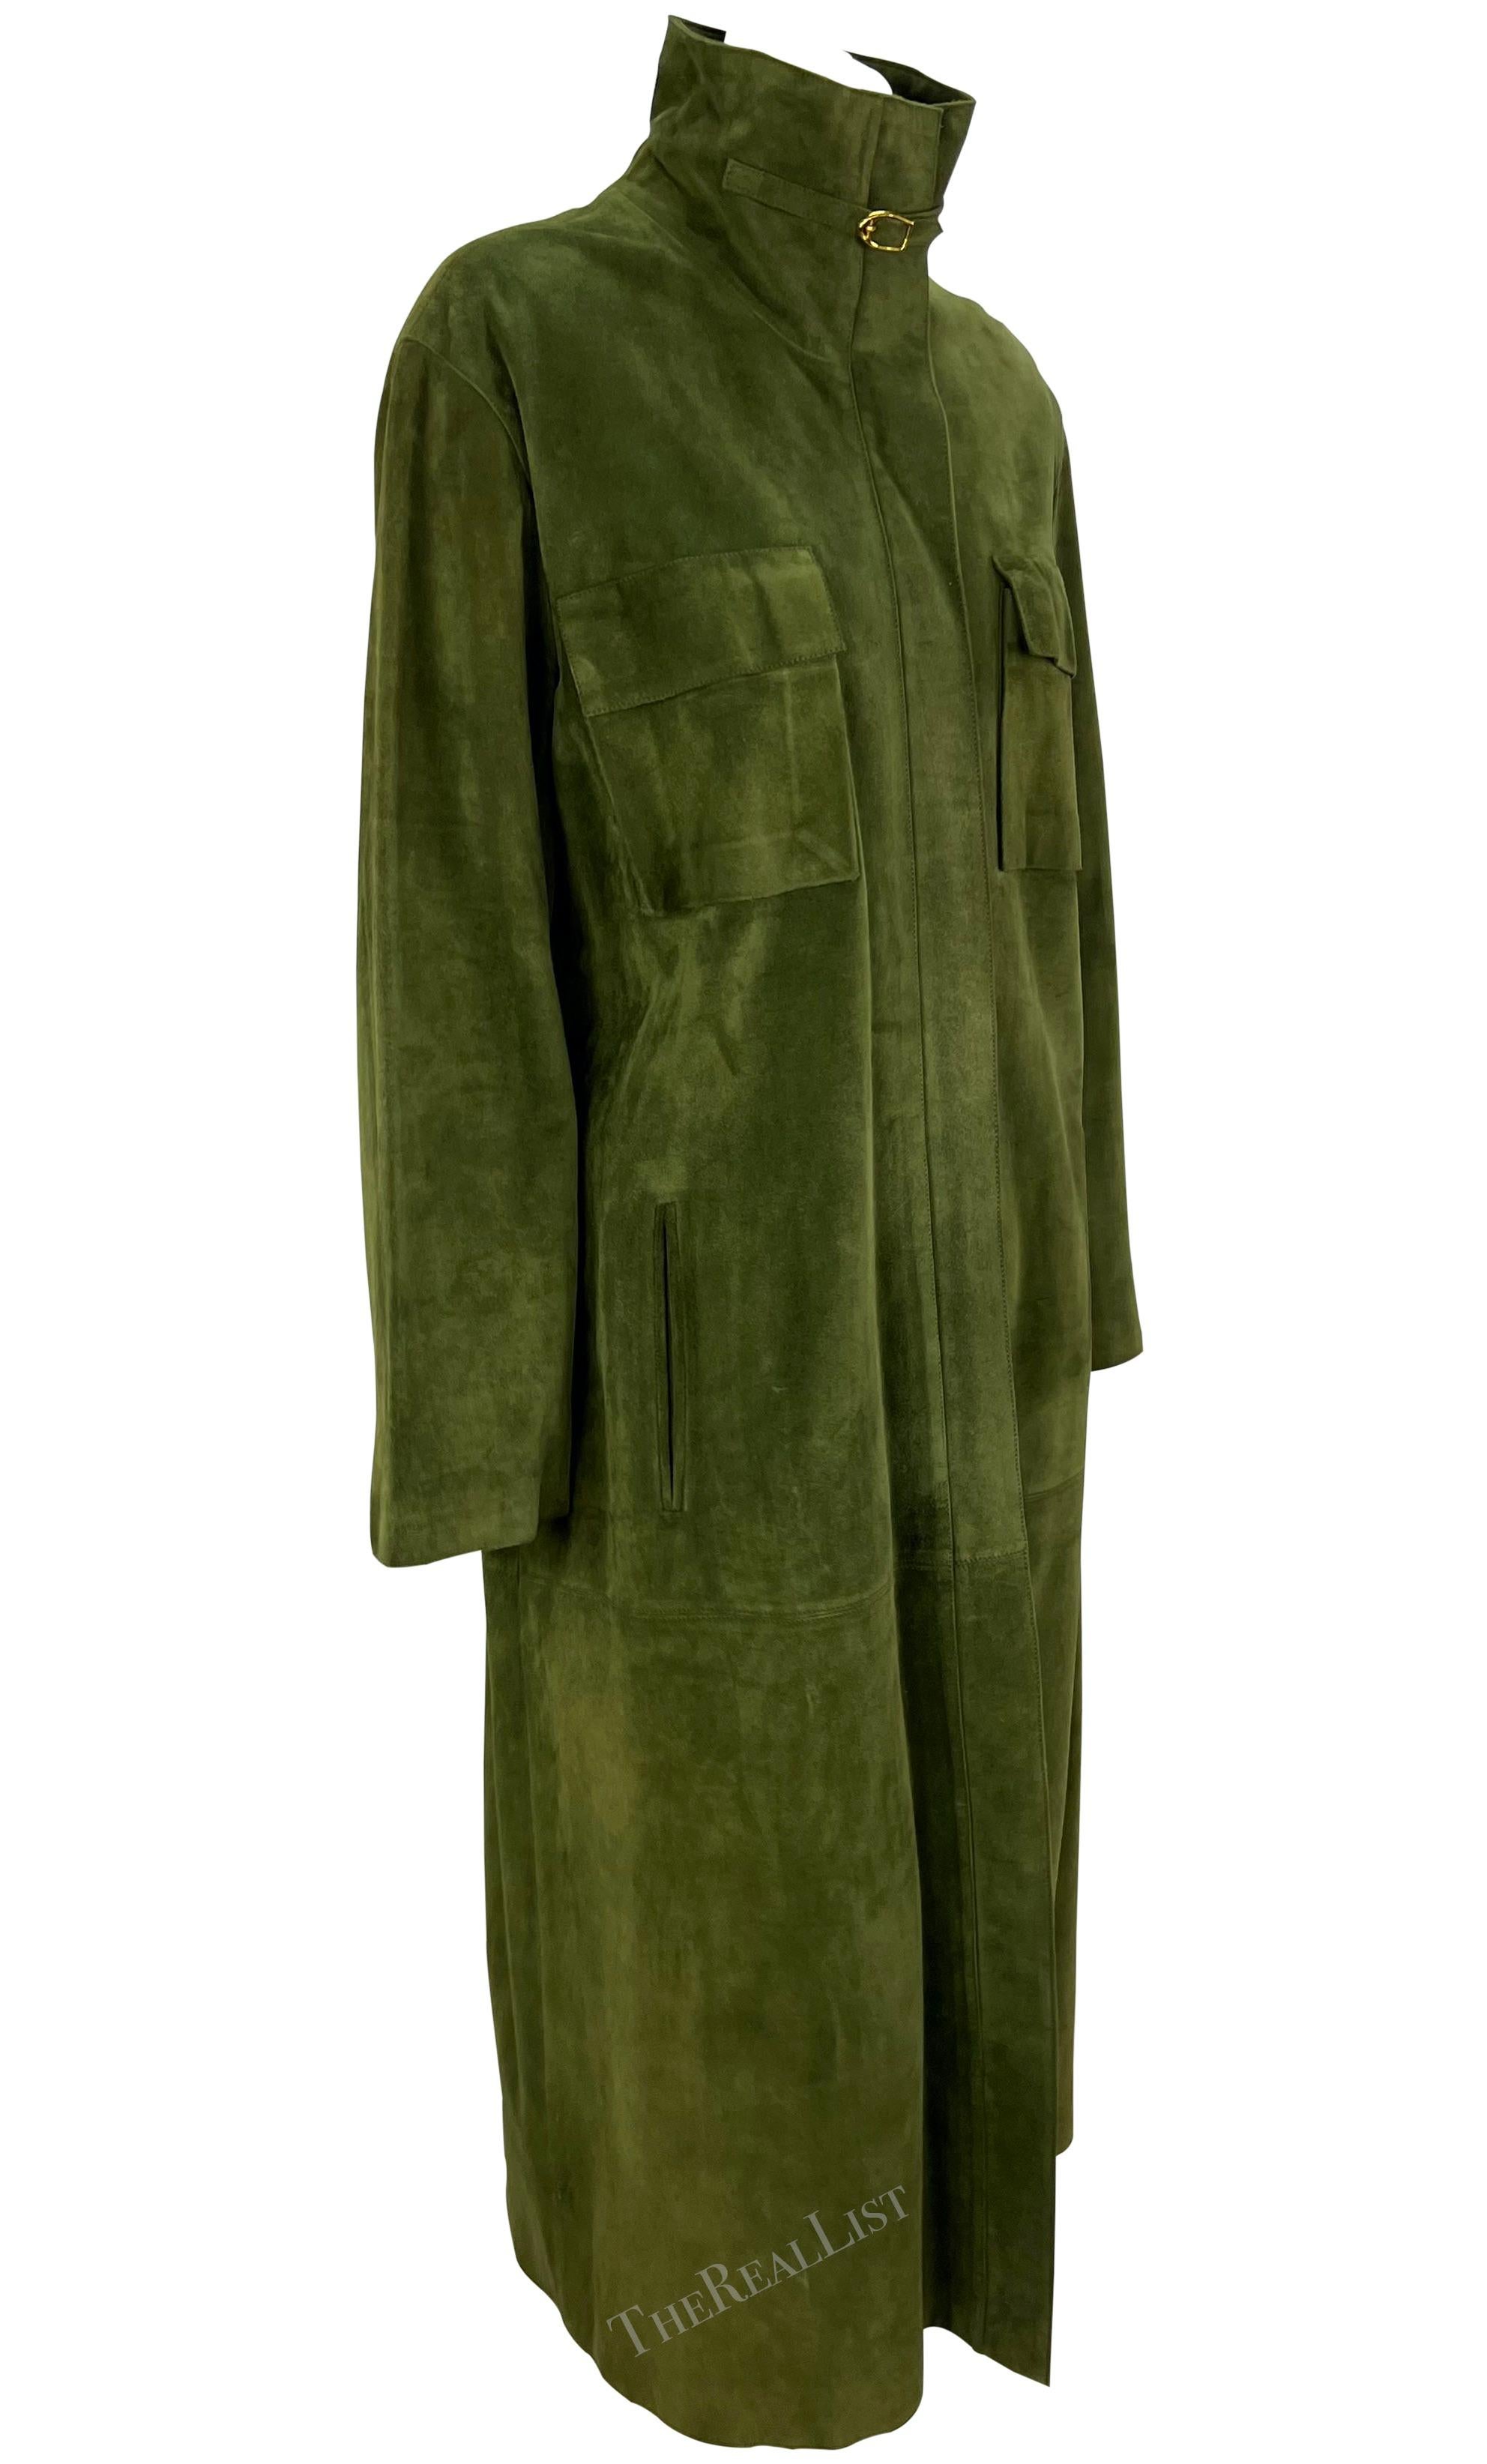 1970s Gucci Stirrup Buckle Green Suede Pocket Full-Length Oversized Trench Coat For Sale 3